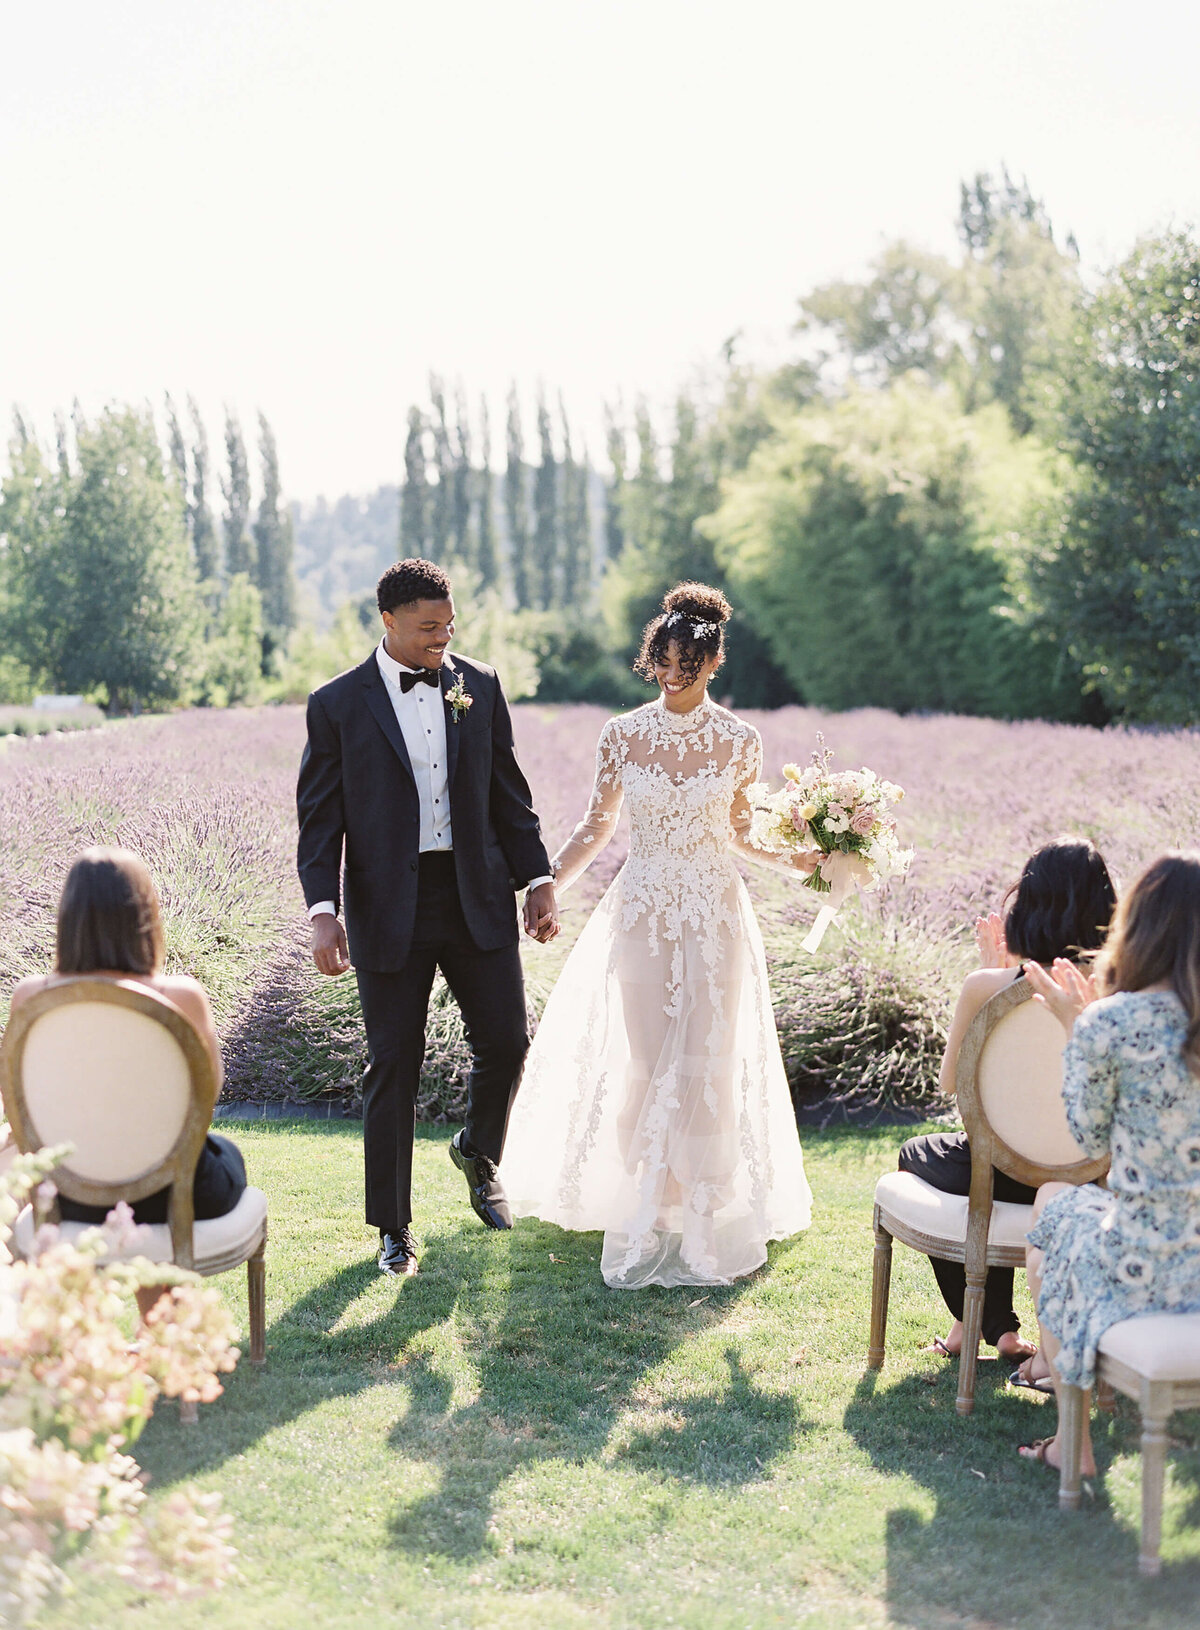 Bride and groom walk up the aisle at ceremony at Woodinville Lavender - Jacqueline Benét